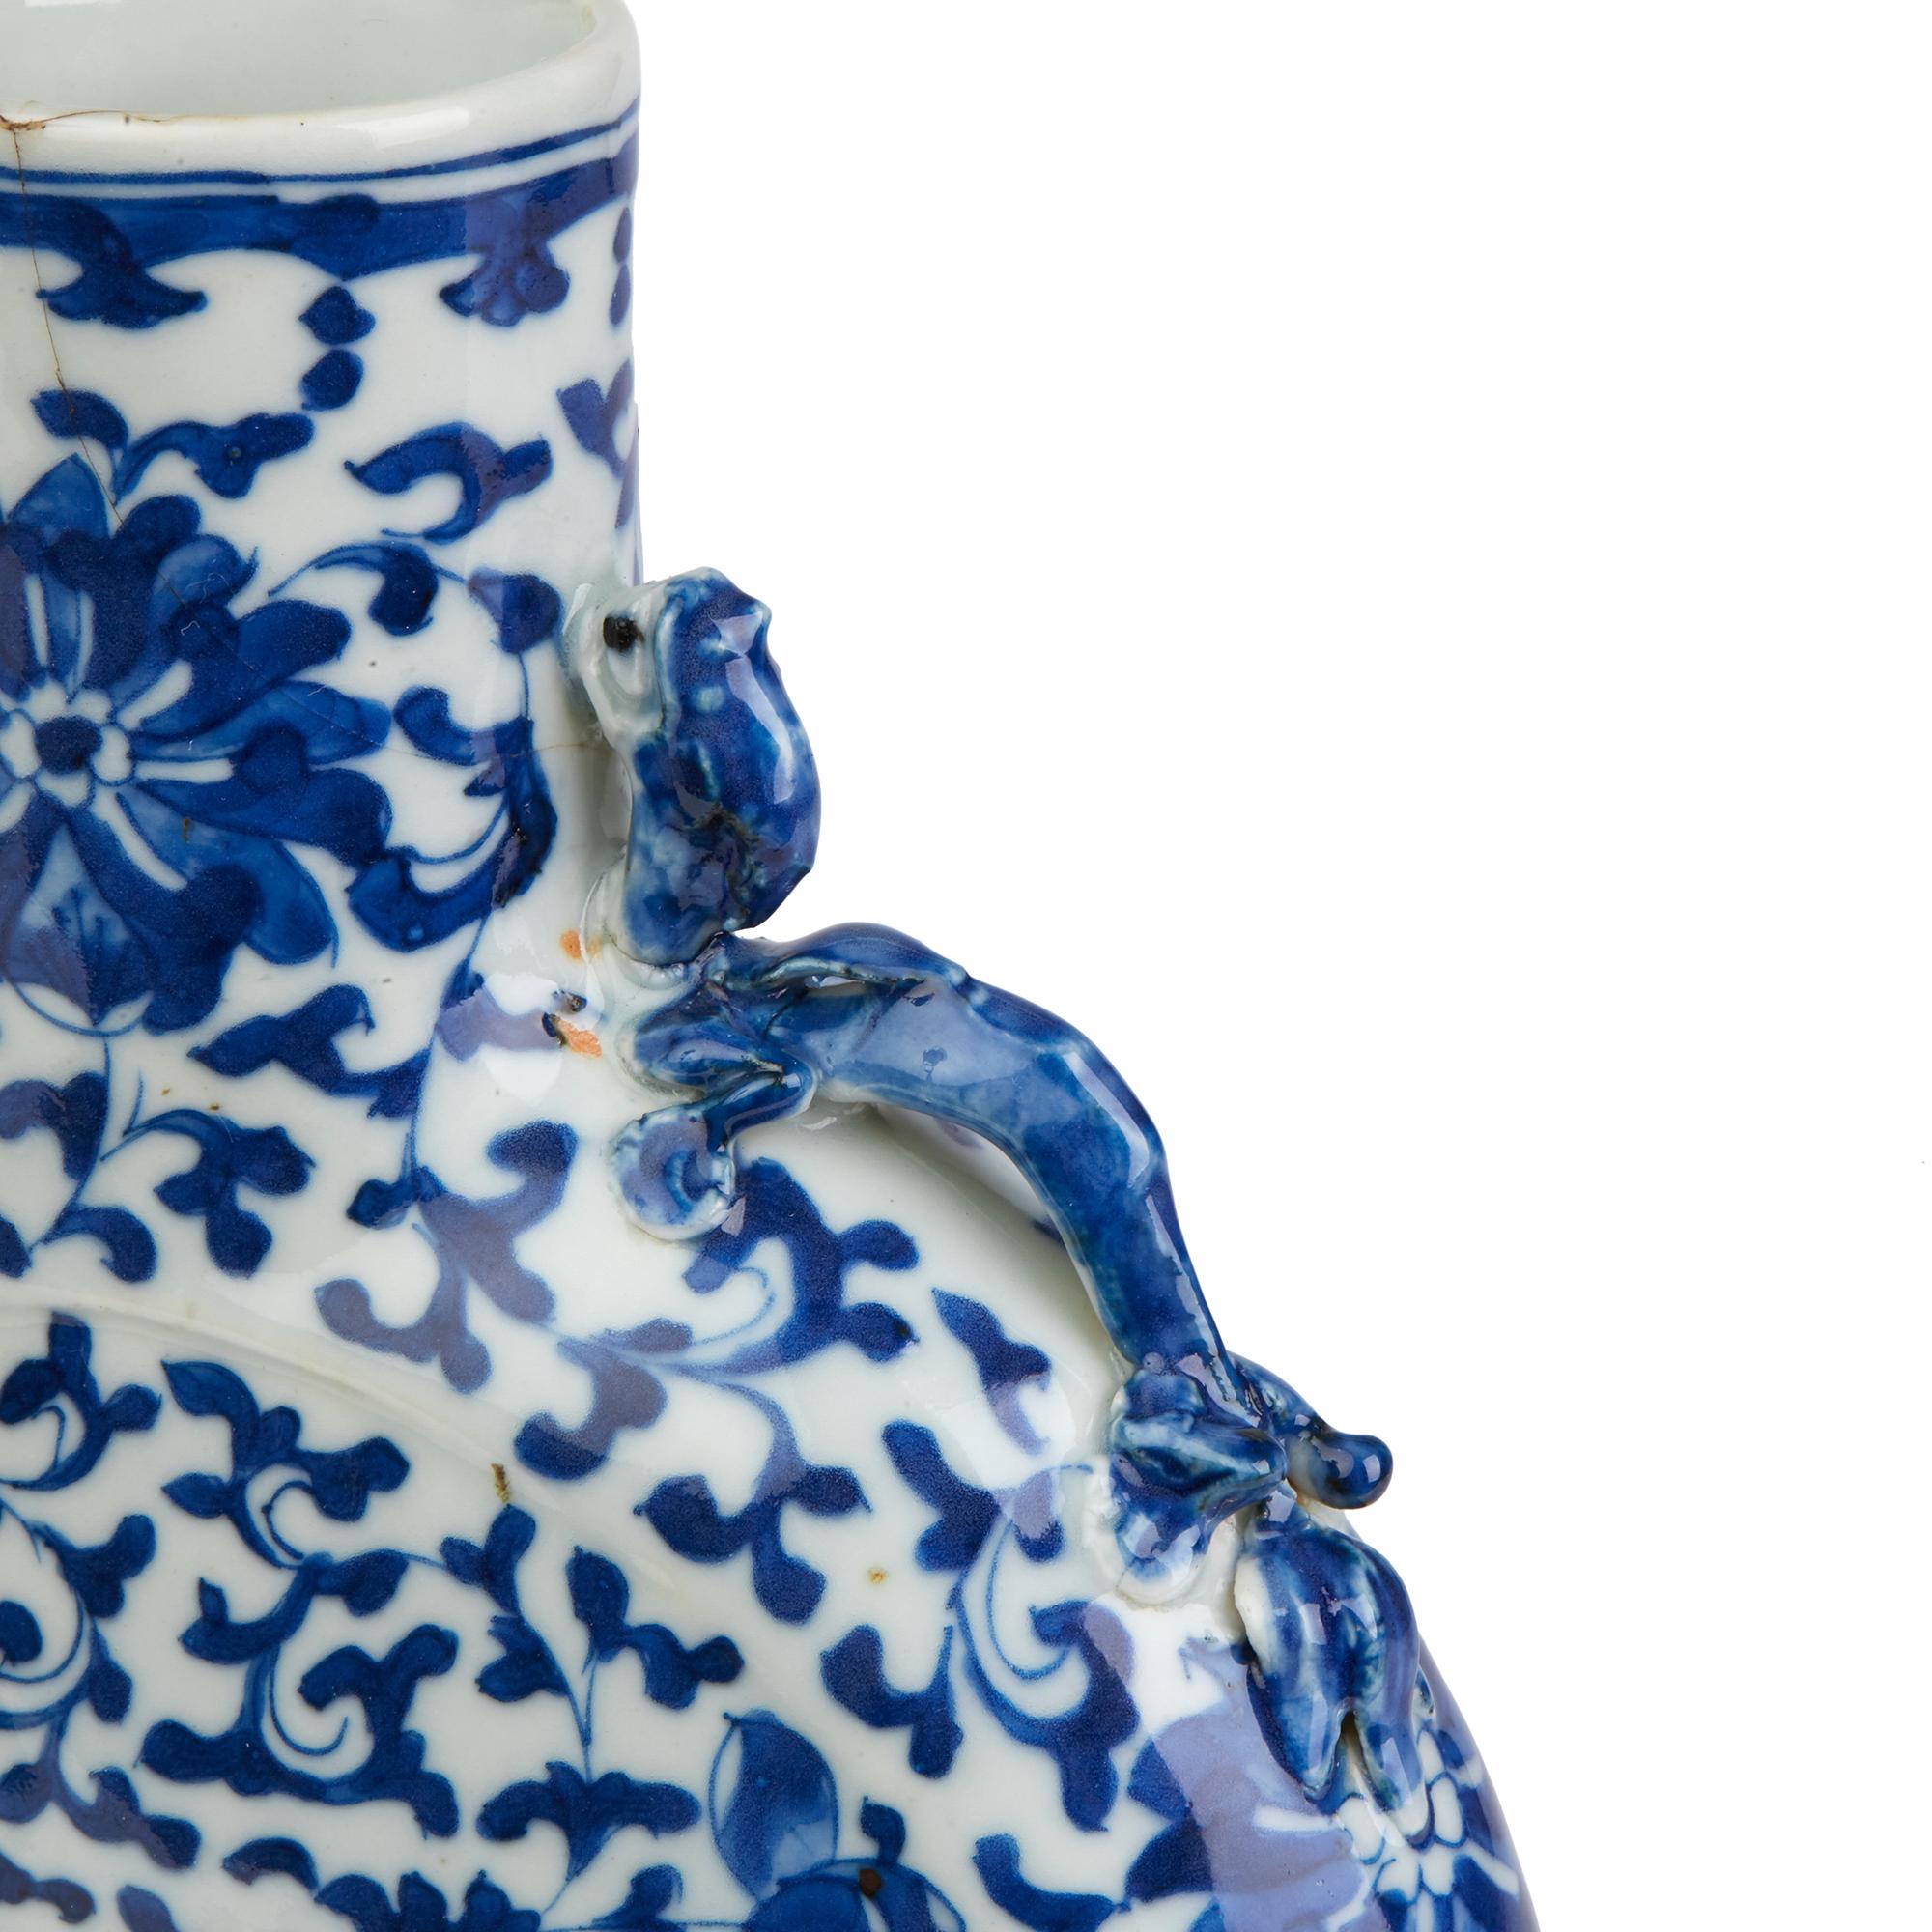 A fine antique Chinese porcelain moon shaped vase with kylin to the shoulders and decorated with trailing blossoms in blue on a white ground. The vase stands on a oval shaped foot with an unglazed rim with a flat moon shaped body and short straight